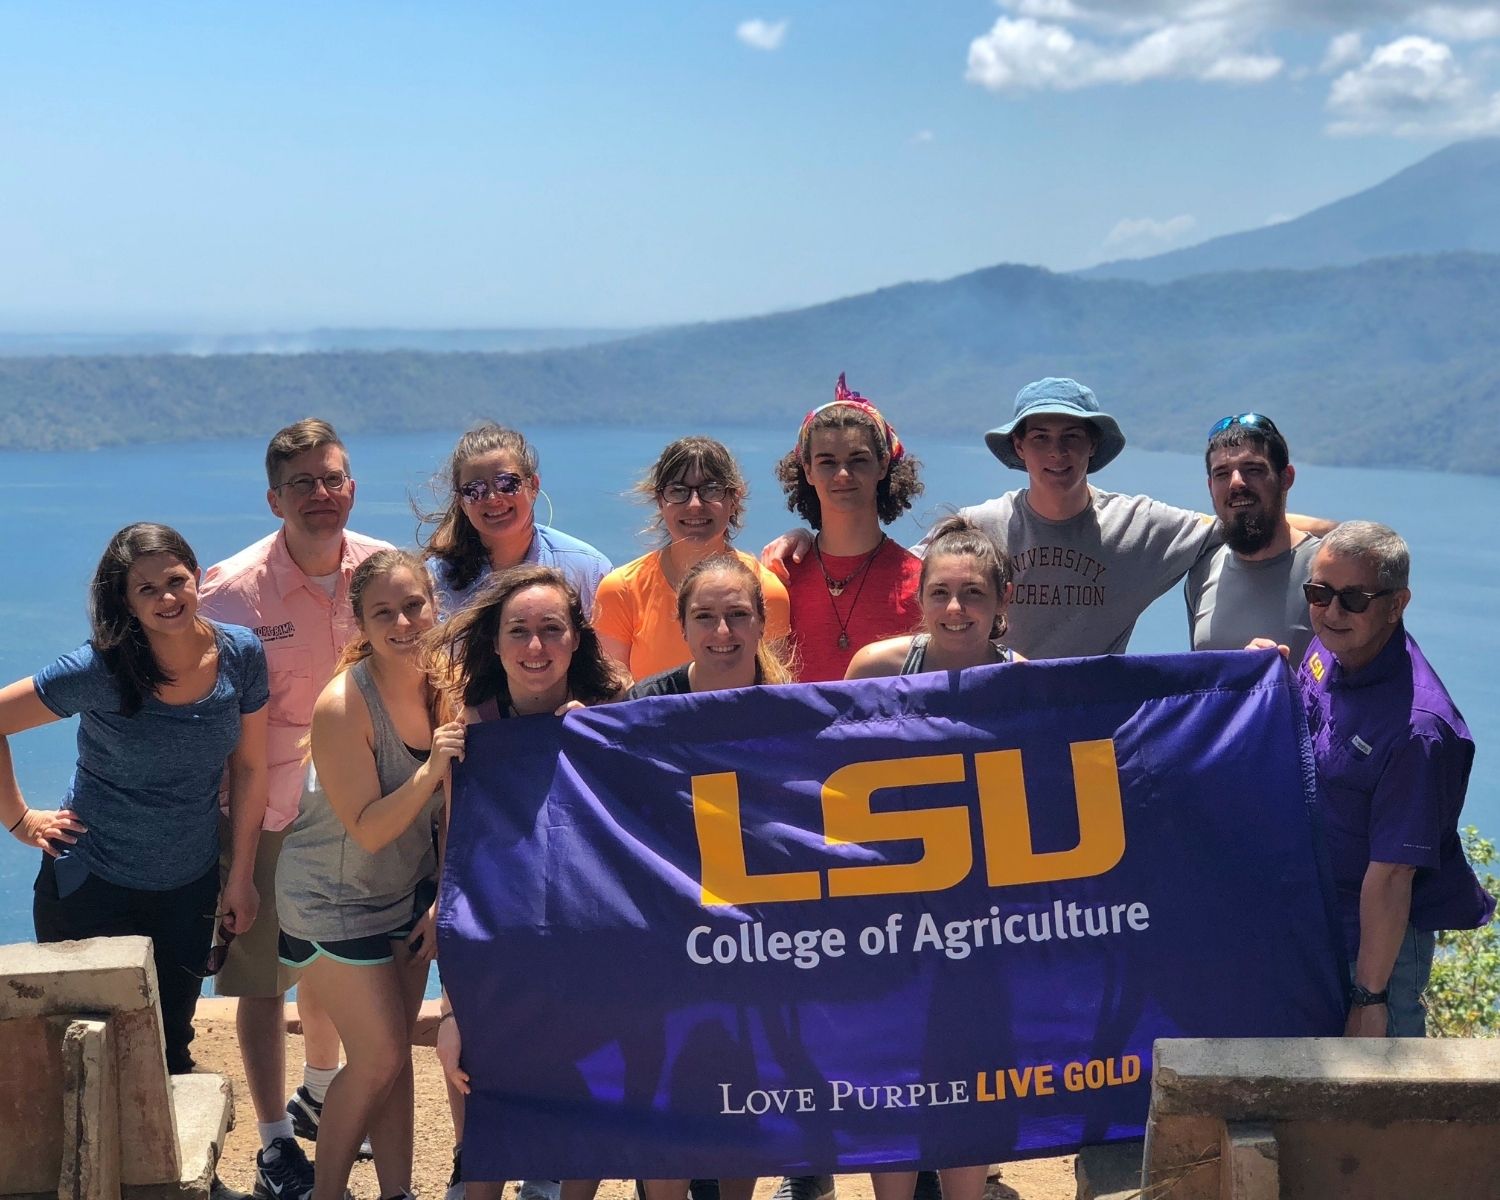 Students hold LSU Collge of Agriculture flag